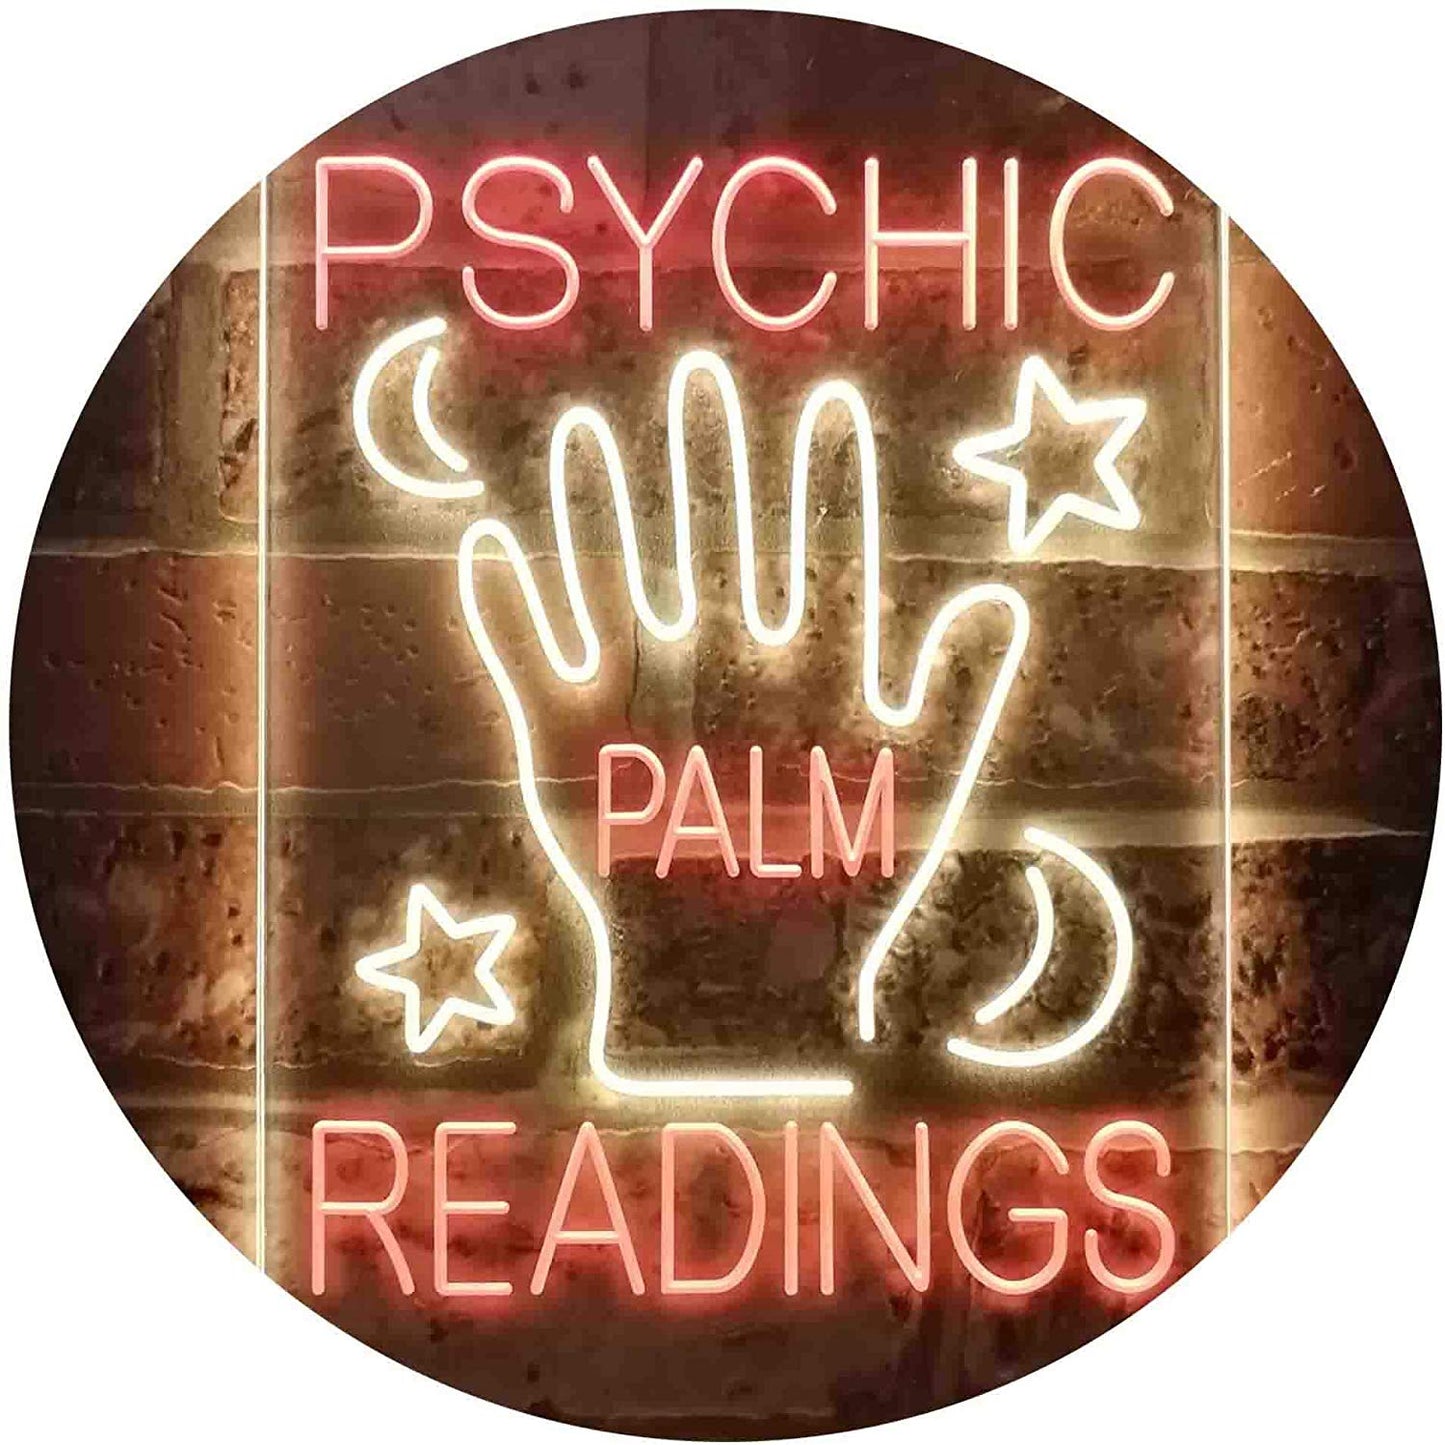 Fortune Teller Psychic Palm Readings LED Neon Light Sign - Way Up Gifts